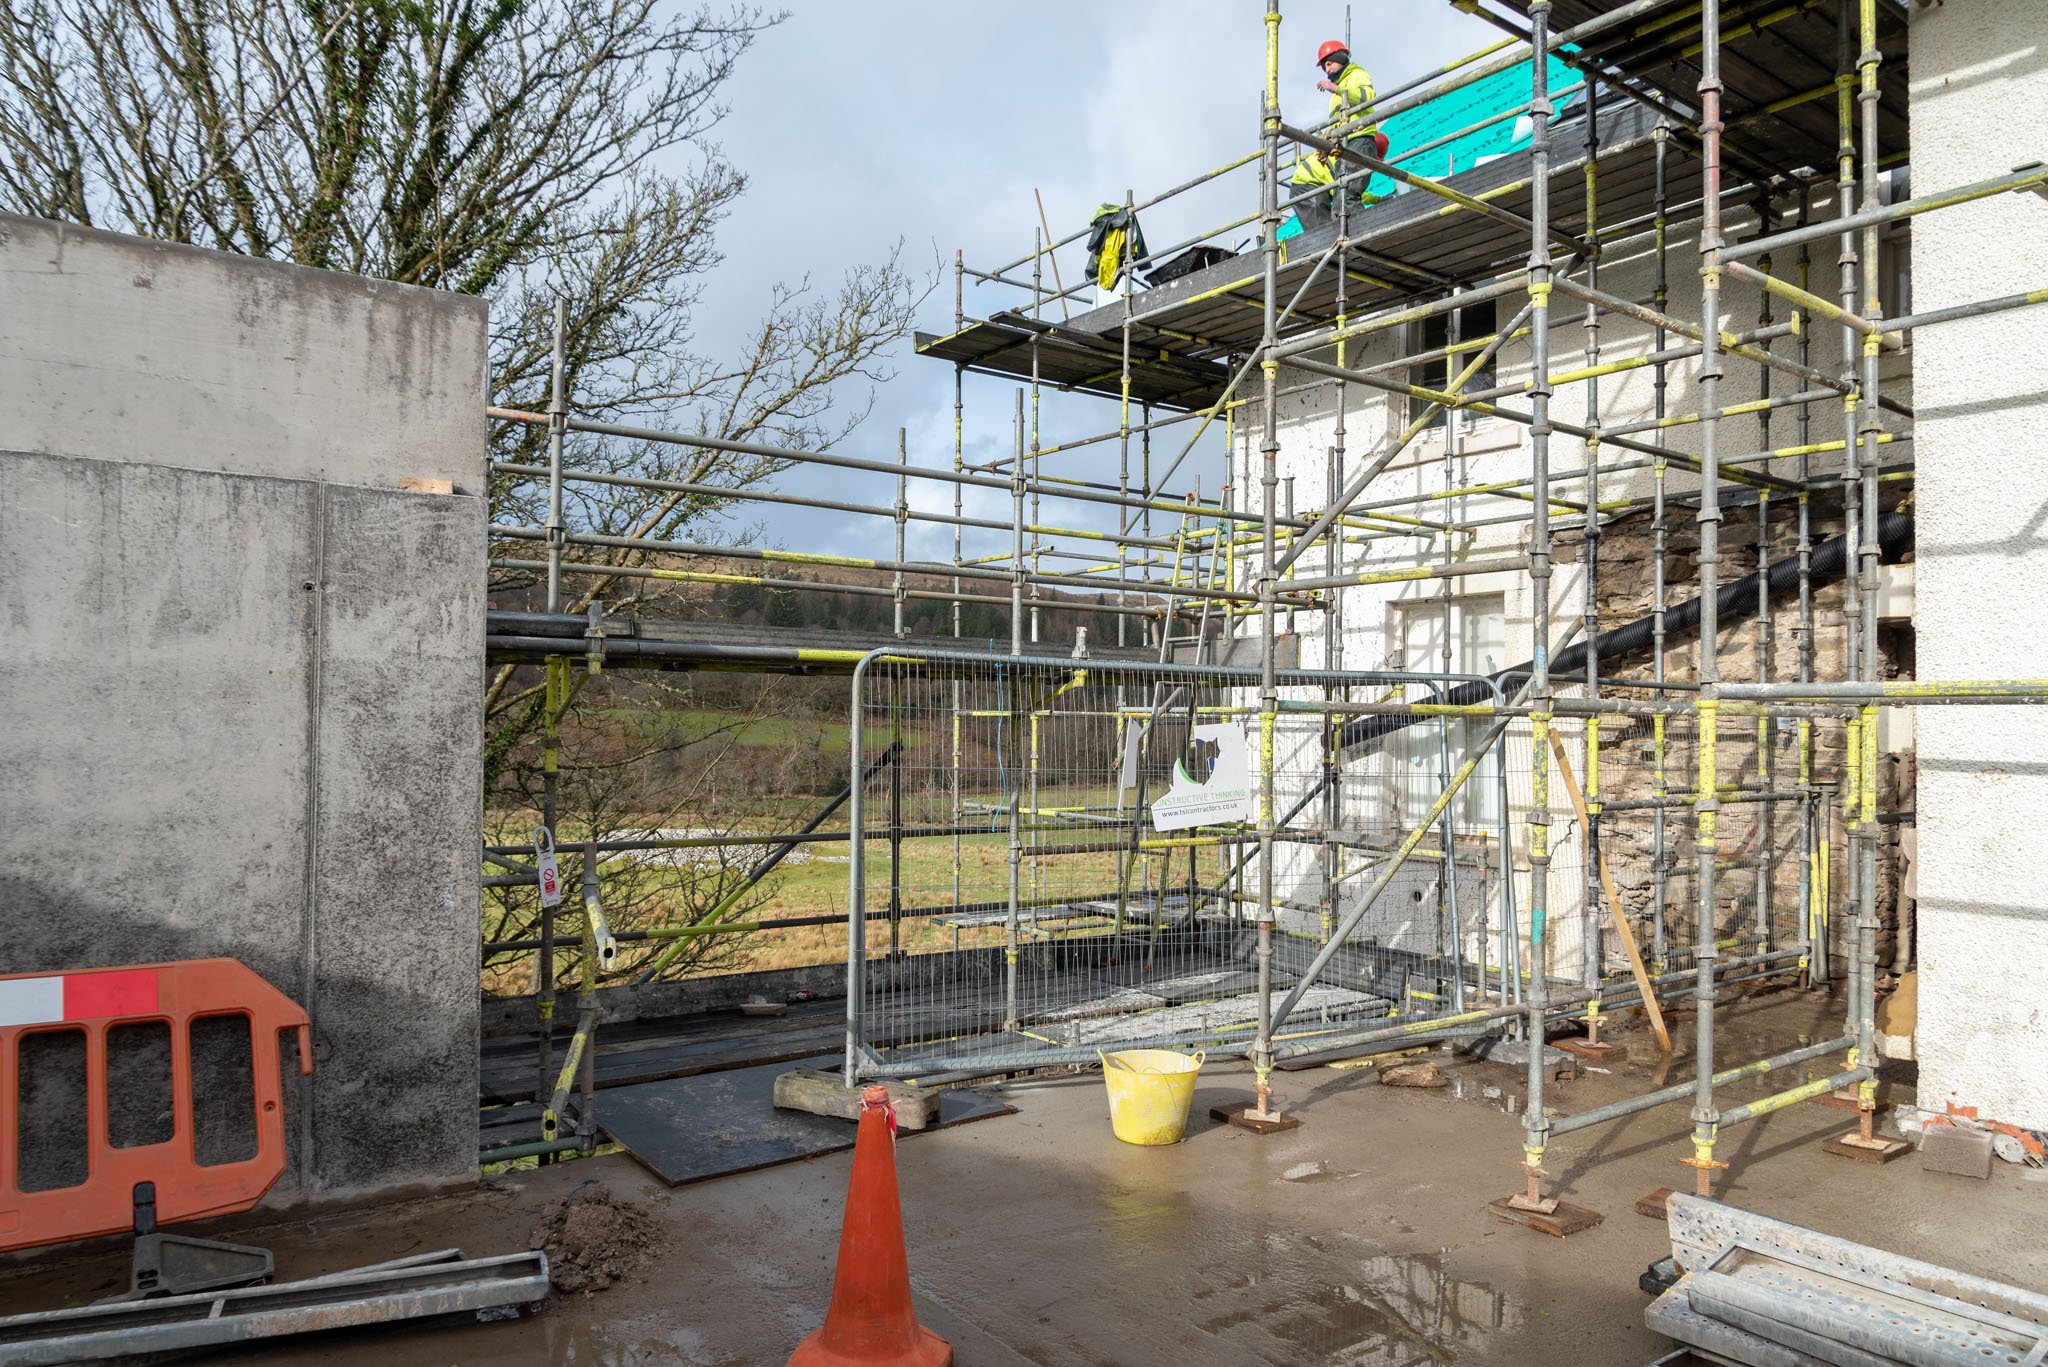  The gap in the wall will be a panoramic window inside the new Exhibition space, revealing views across Kilmartin Glen. 